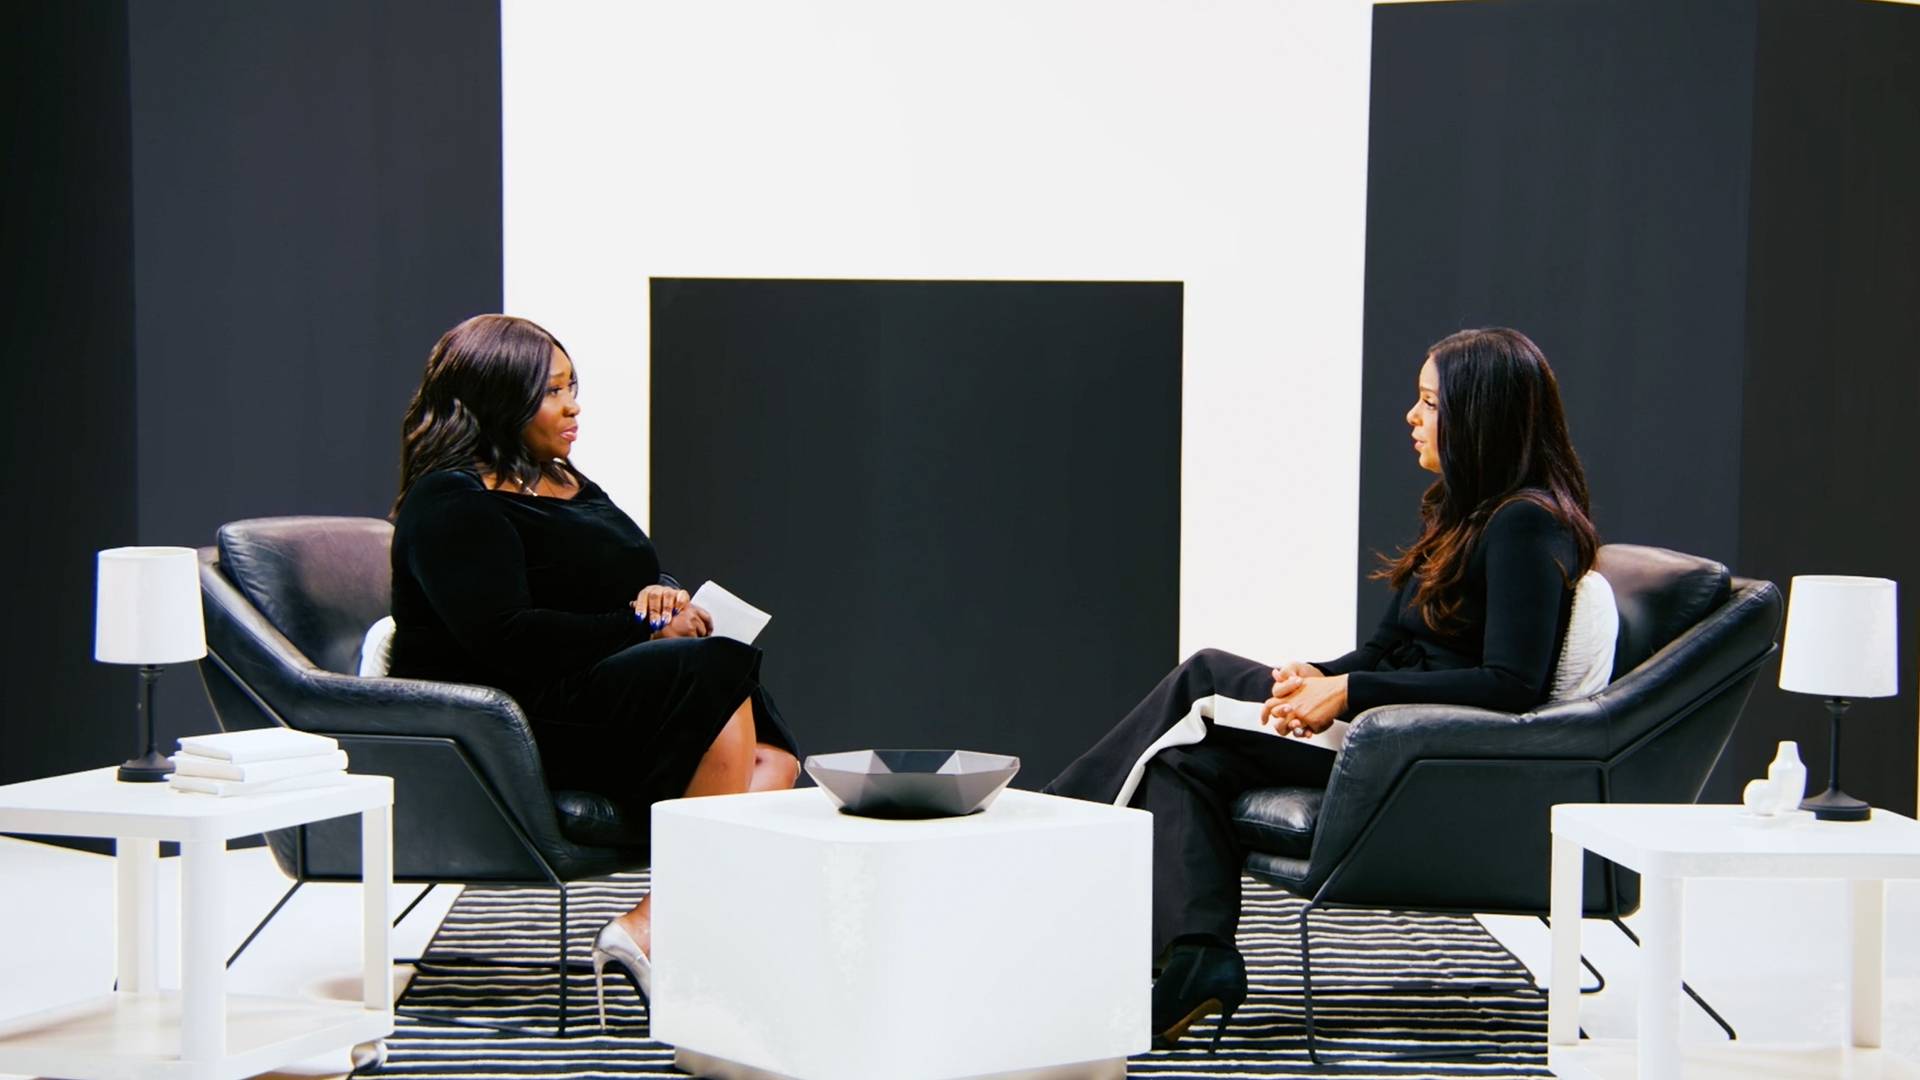 Bevy Smith and Soledad O'Brien on BET's Disrupt & Dismantle on BET 2021.